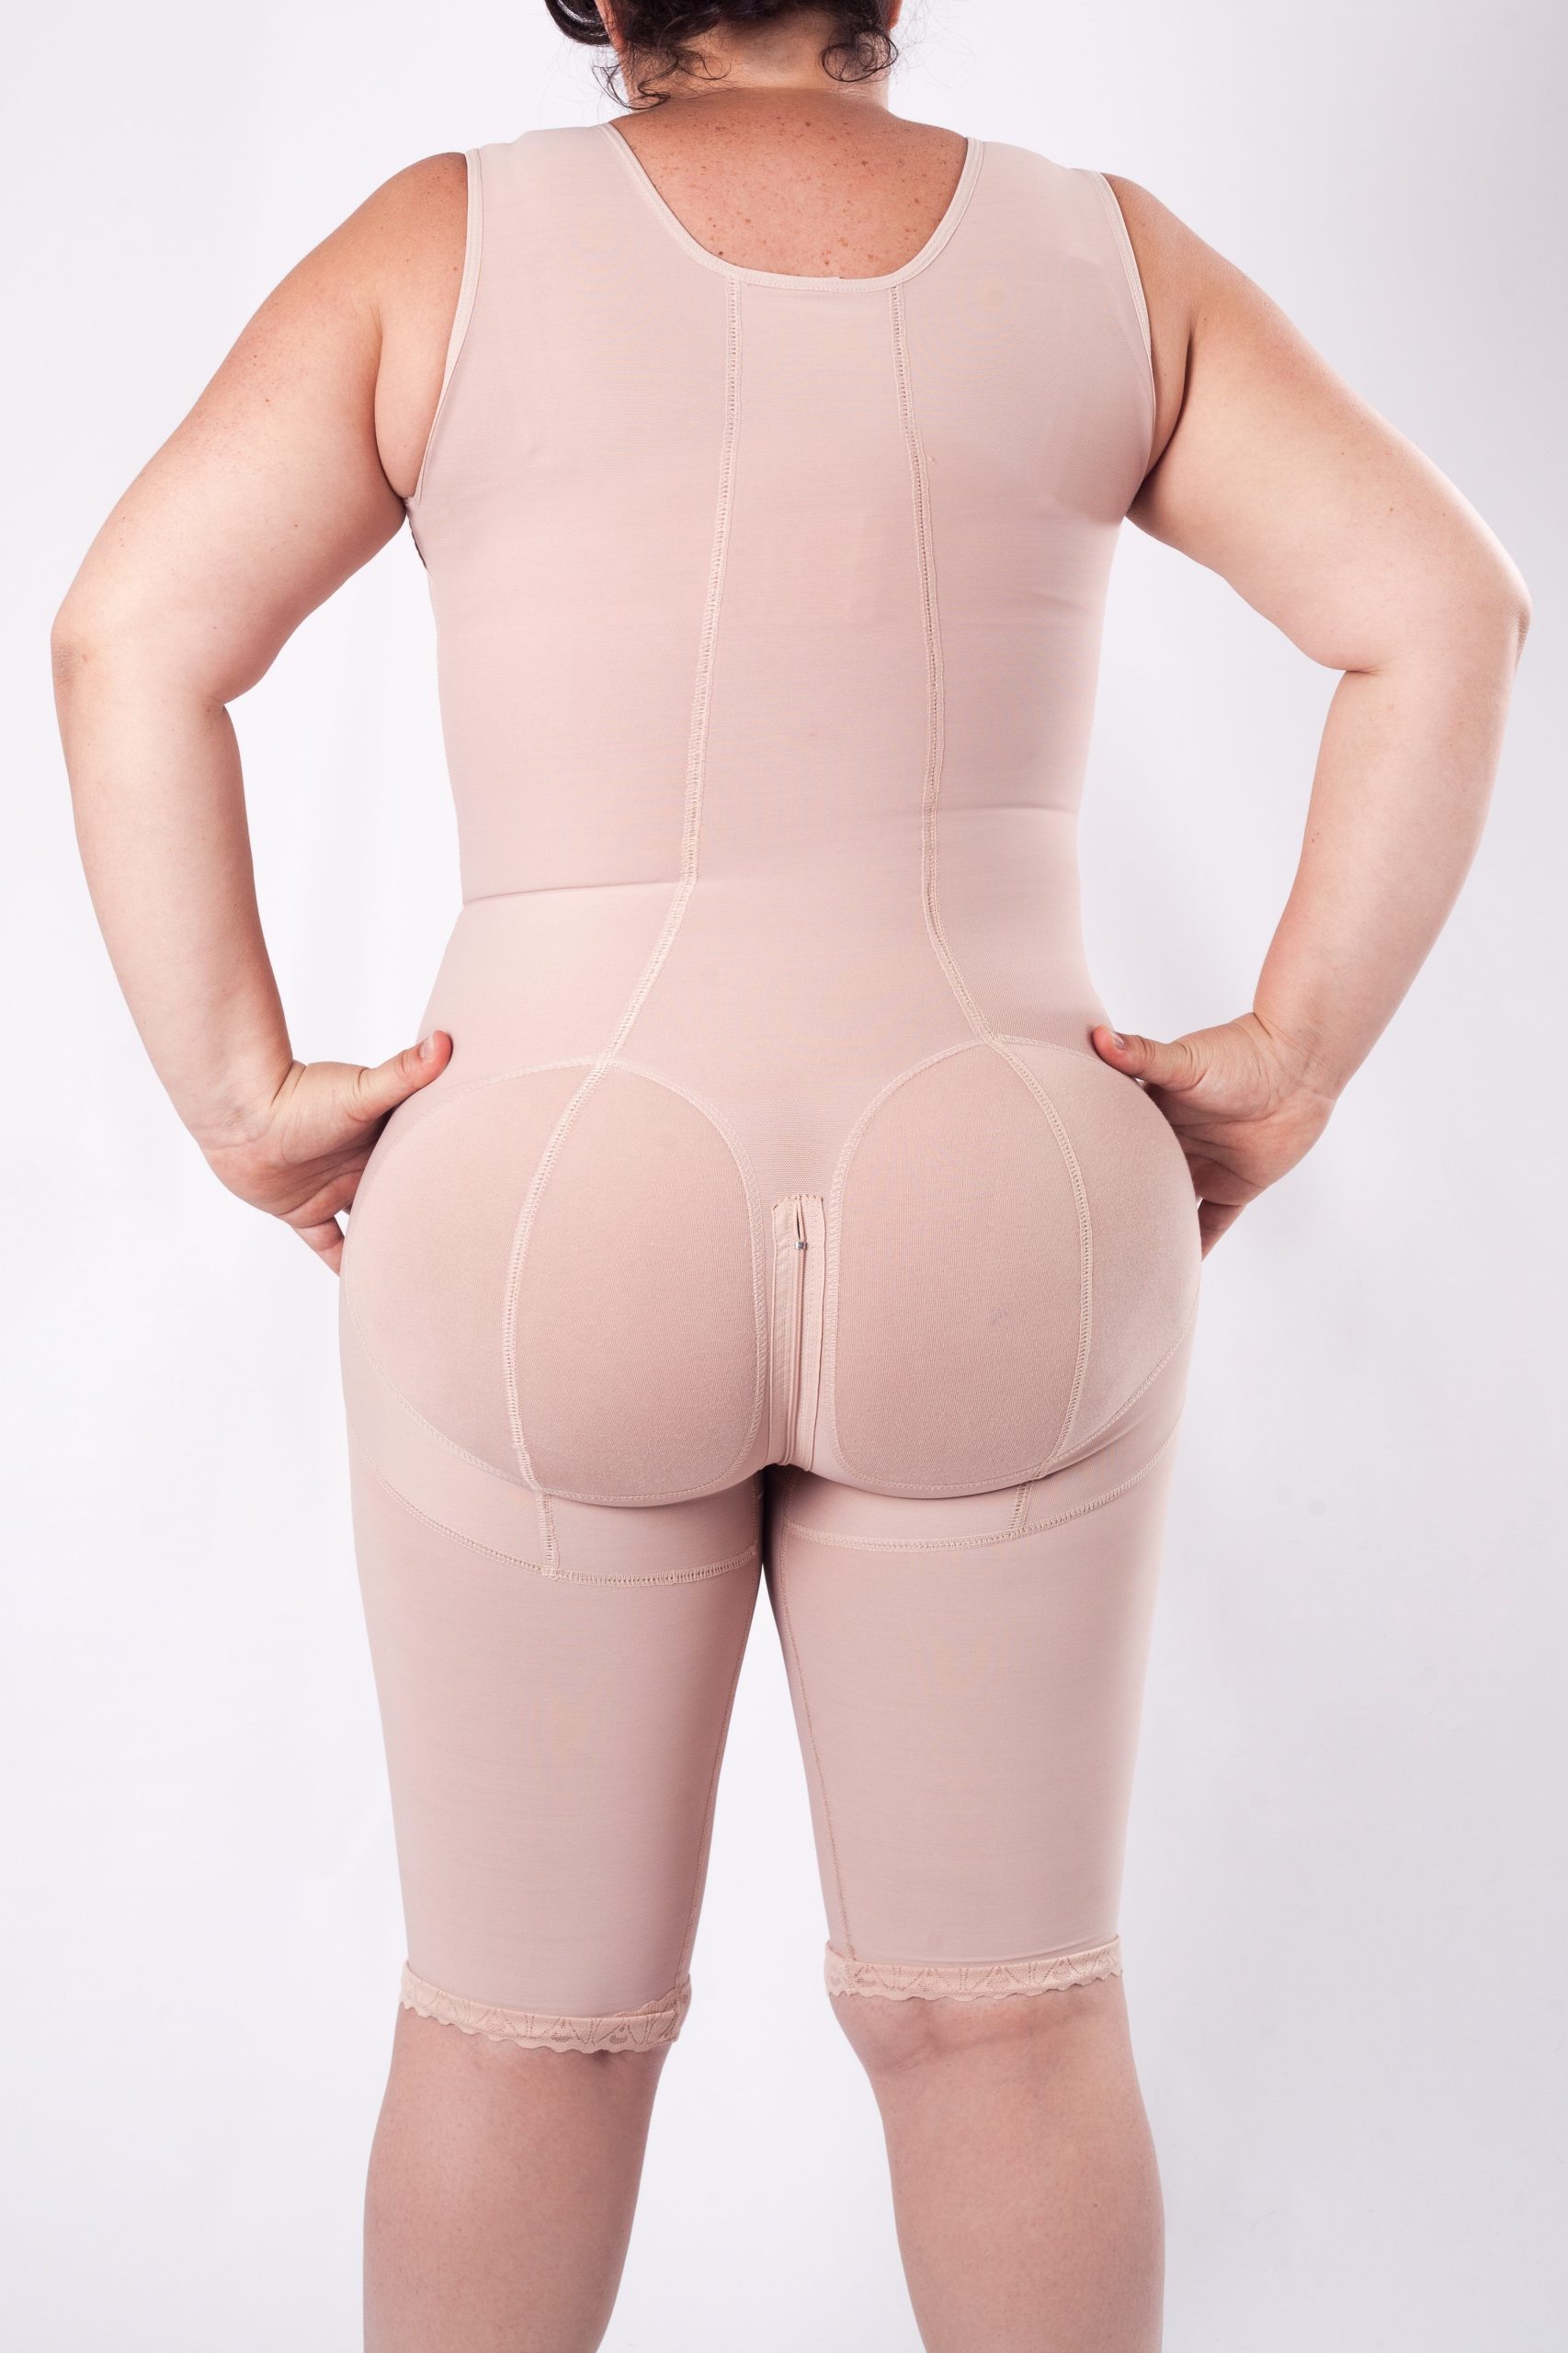 Best Shapewear for Post-Surgical Body Shaper - HELLO FASHION